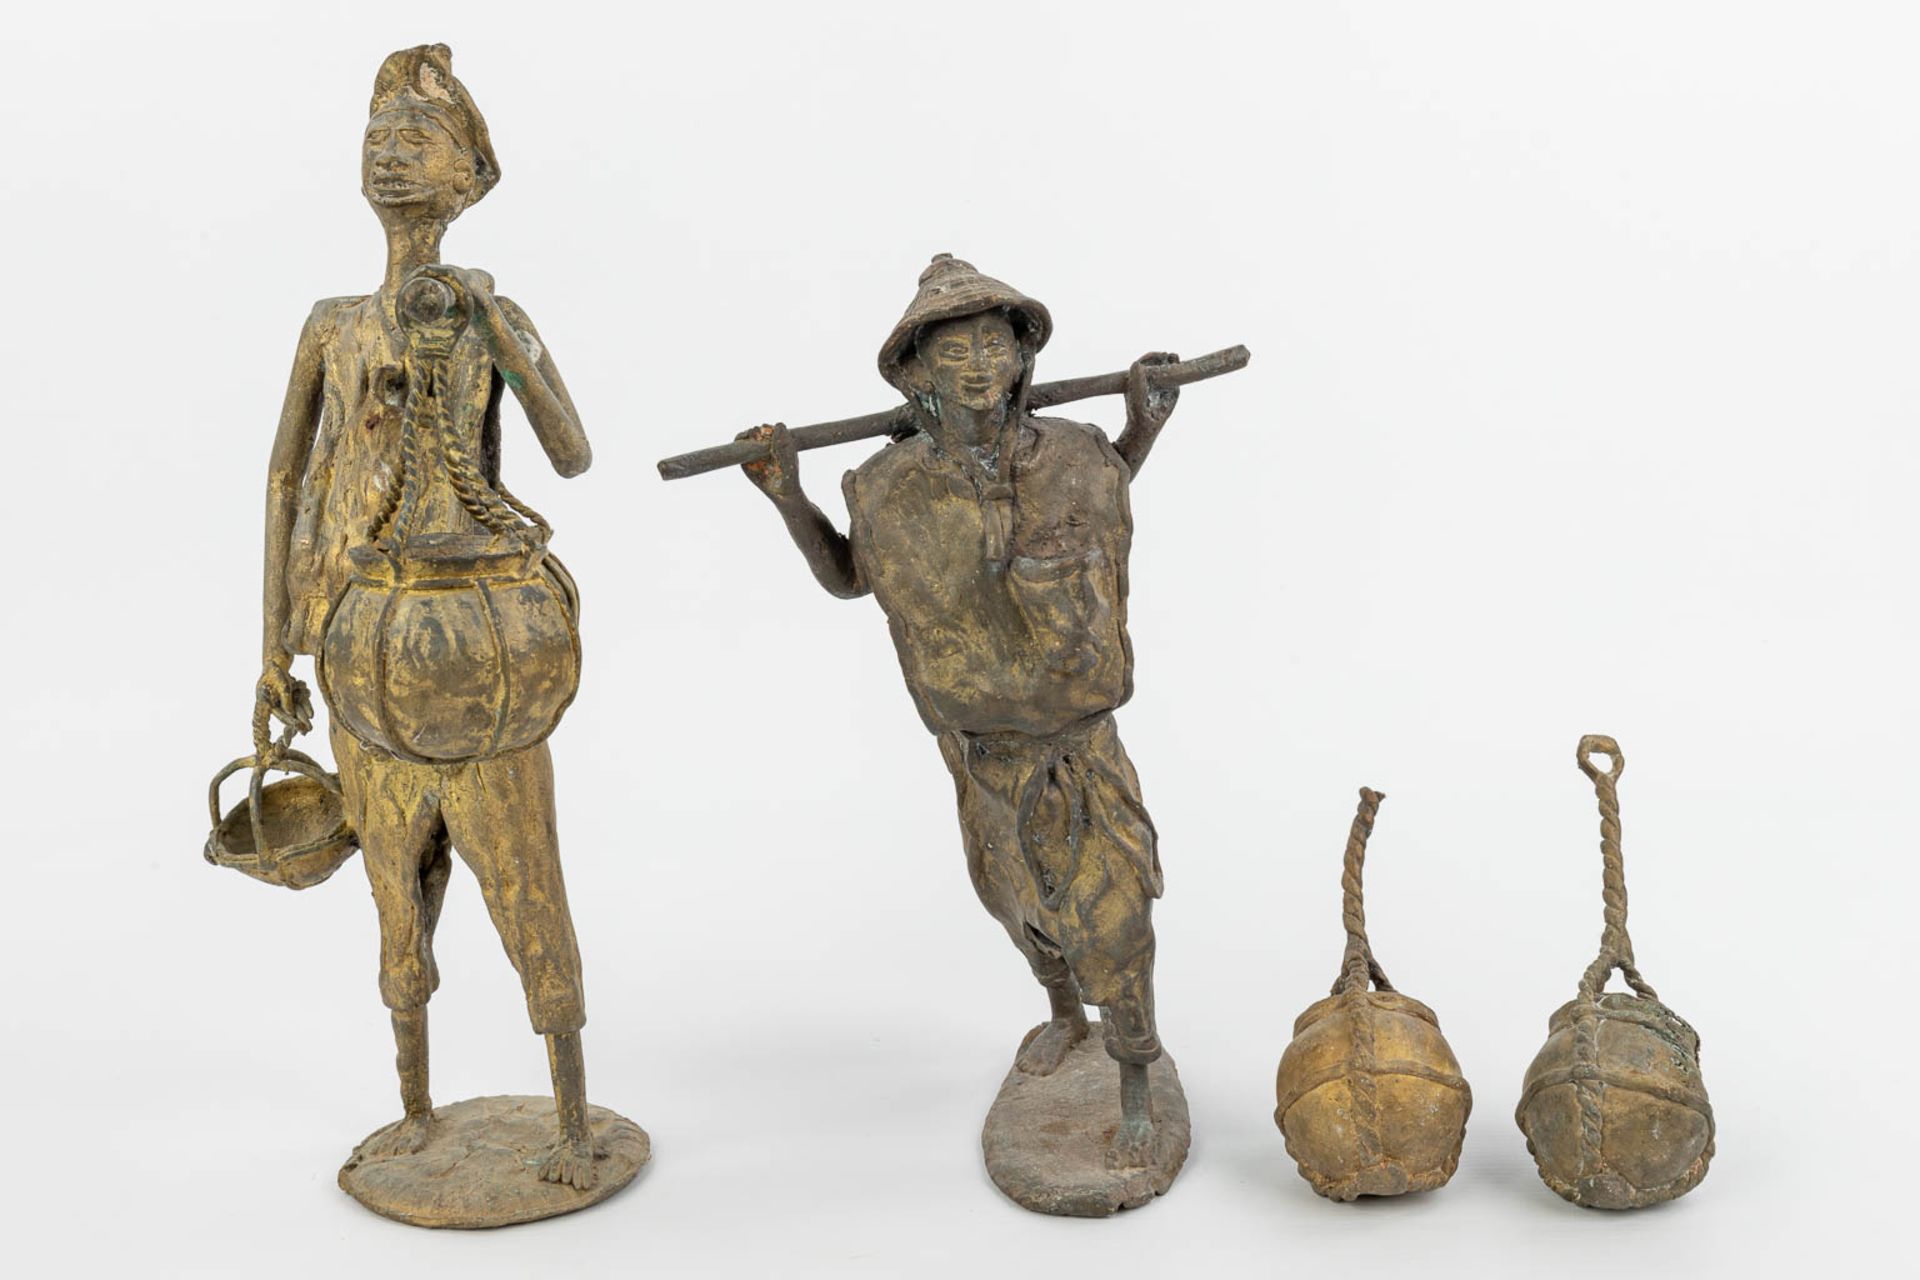 A set of 2 bronze statues of Asian figurines with baskets. (H:36cm) - Image 6 of 11